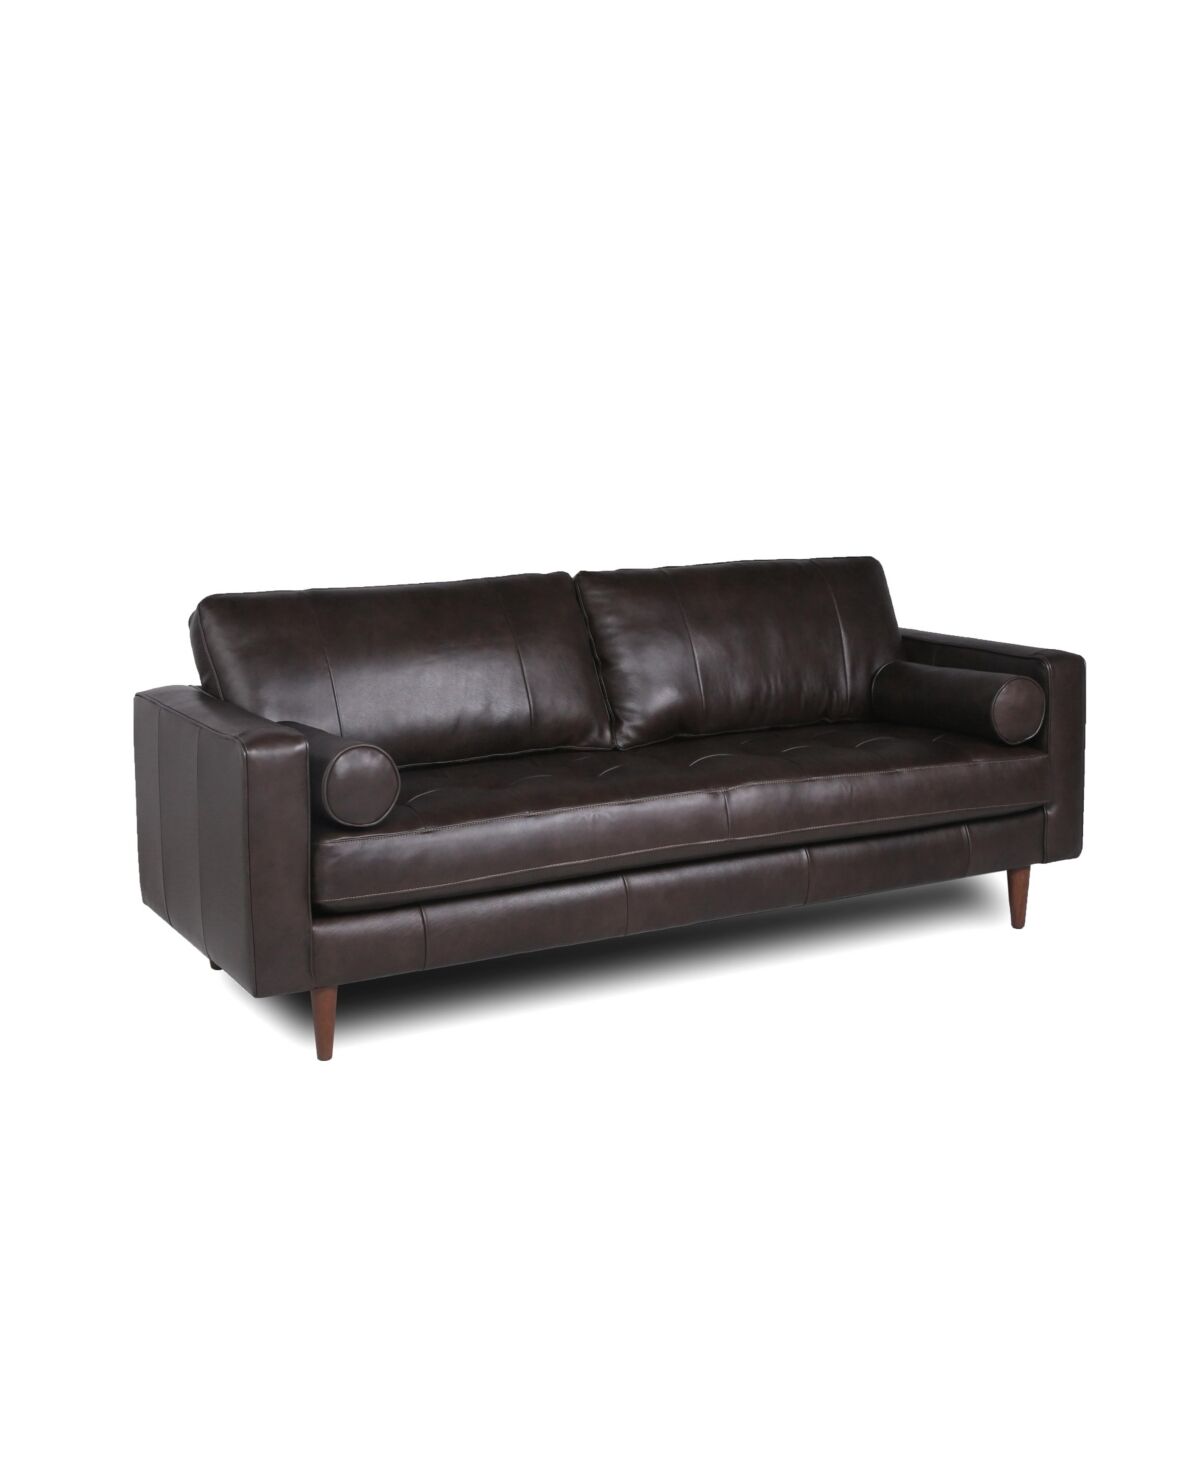 Nice Link Maebelle Leather Sofa with Tufted Seat And Back - Brown